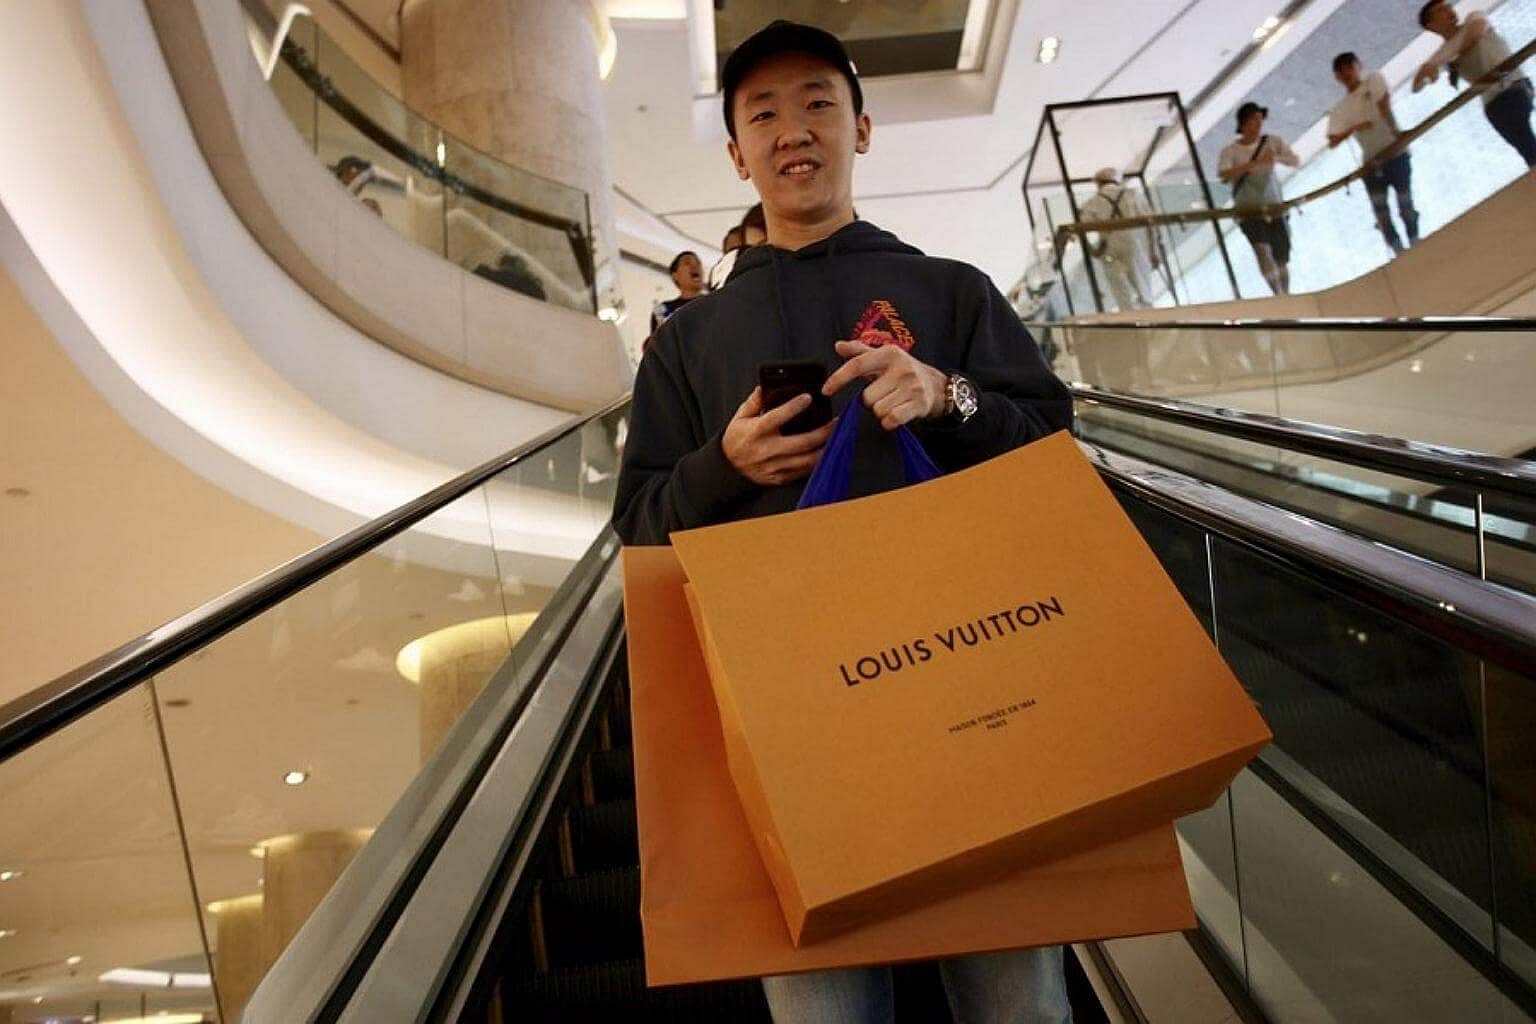 Excited fans queue overnight outside Ion Orchard for Louis Vuitton